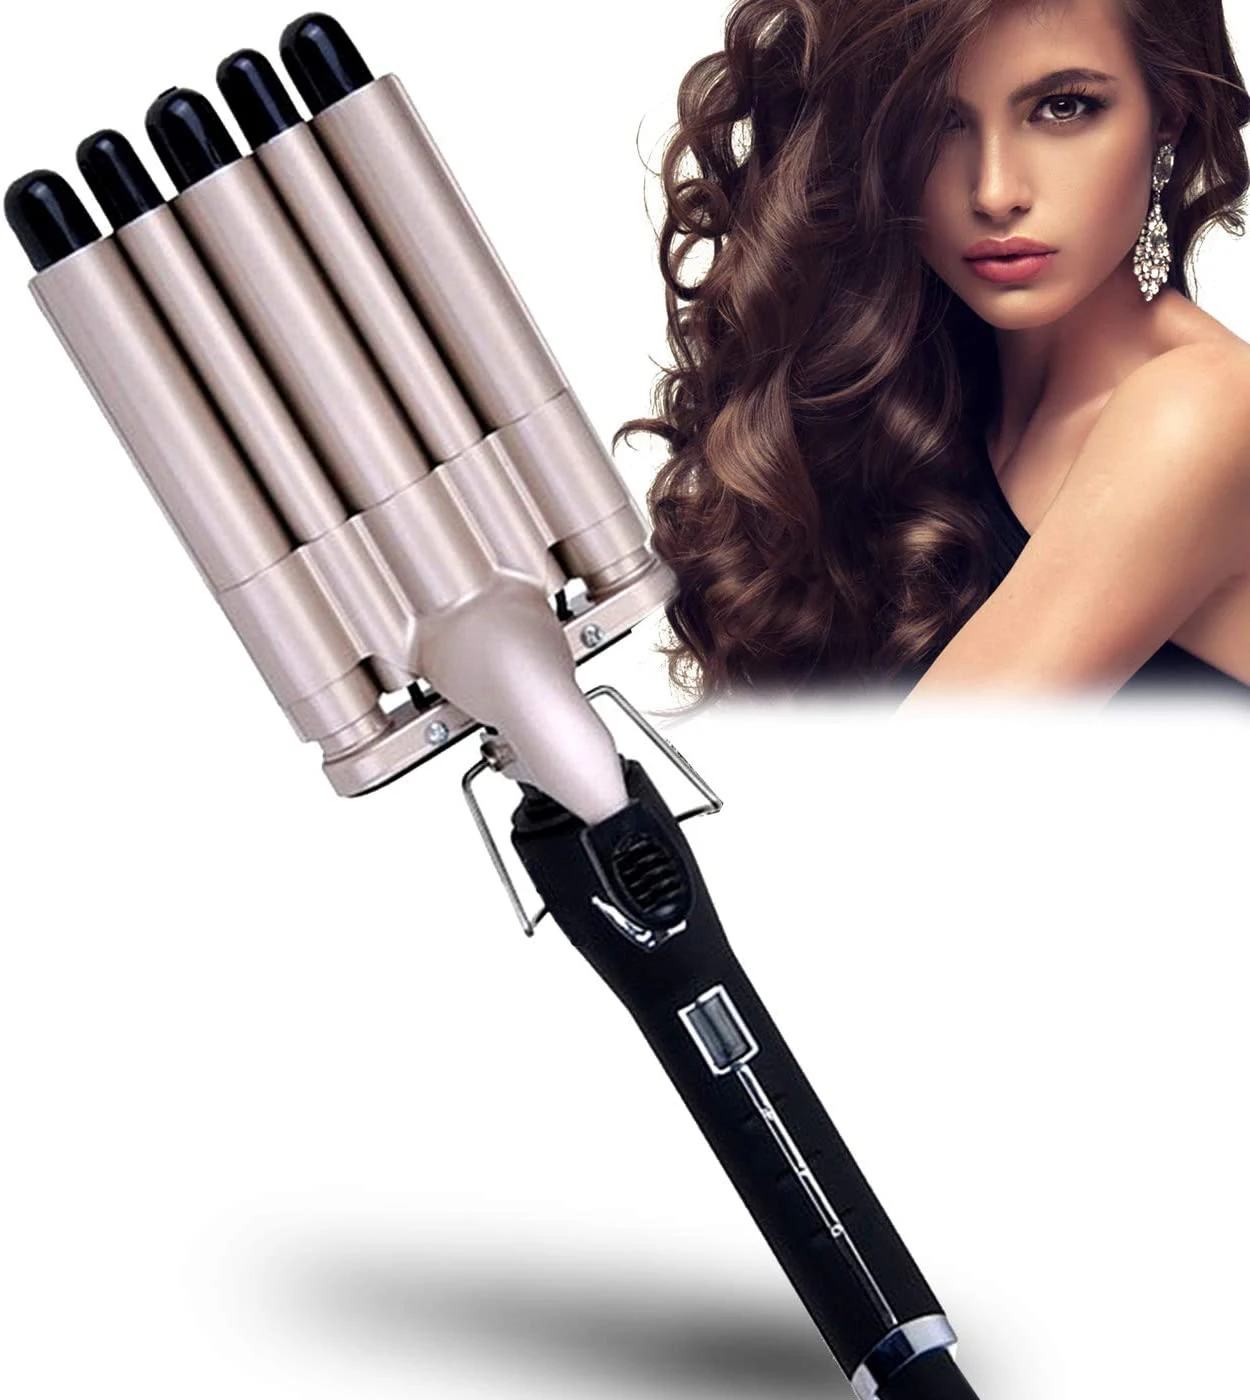 

Hot selling professional 5 Barrel hair iron ceramic automatic hair curler iron with three barrels salon hair curling wand, Gold